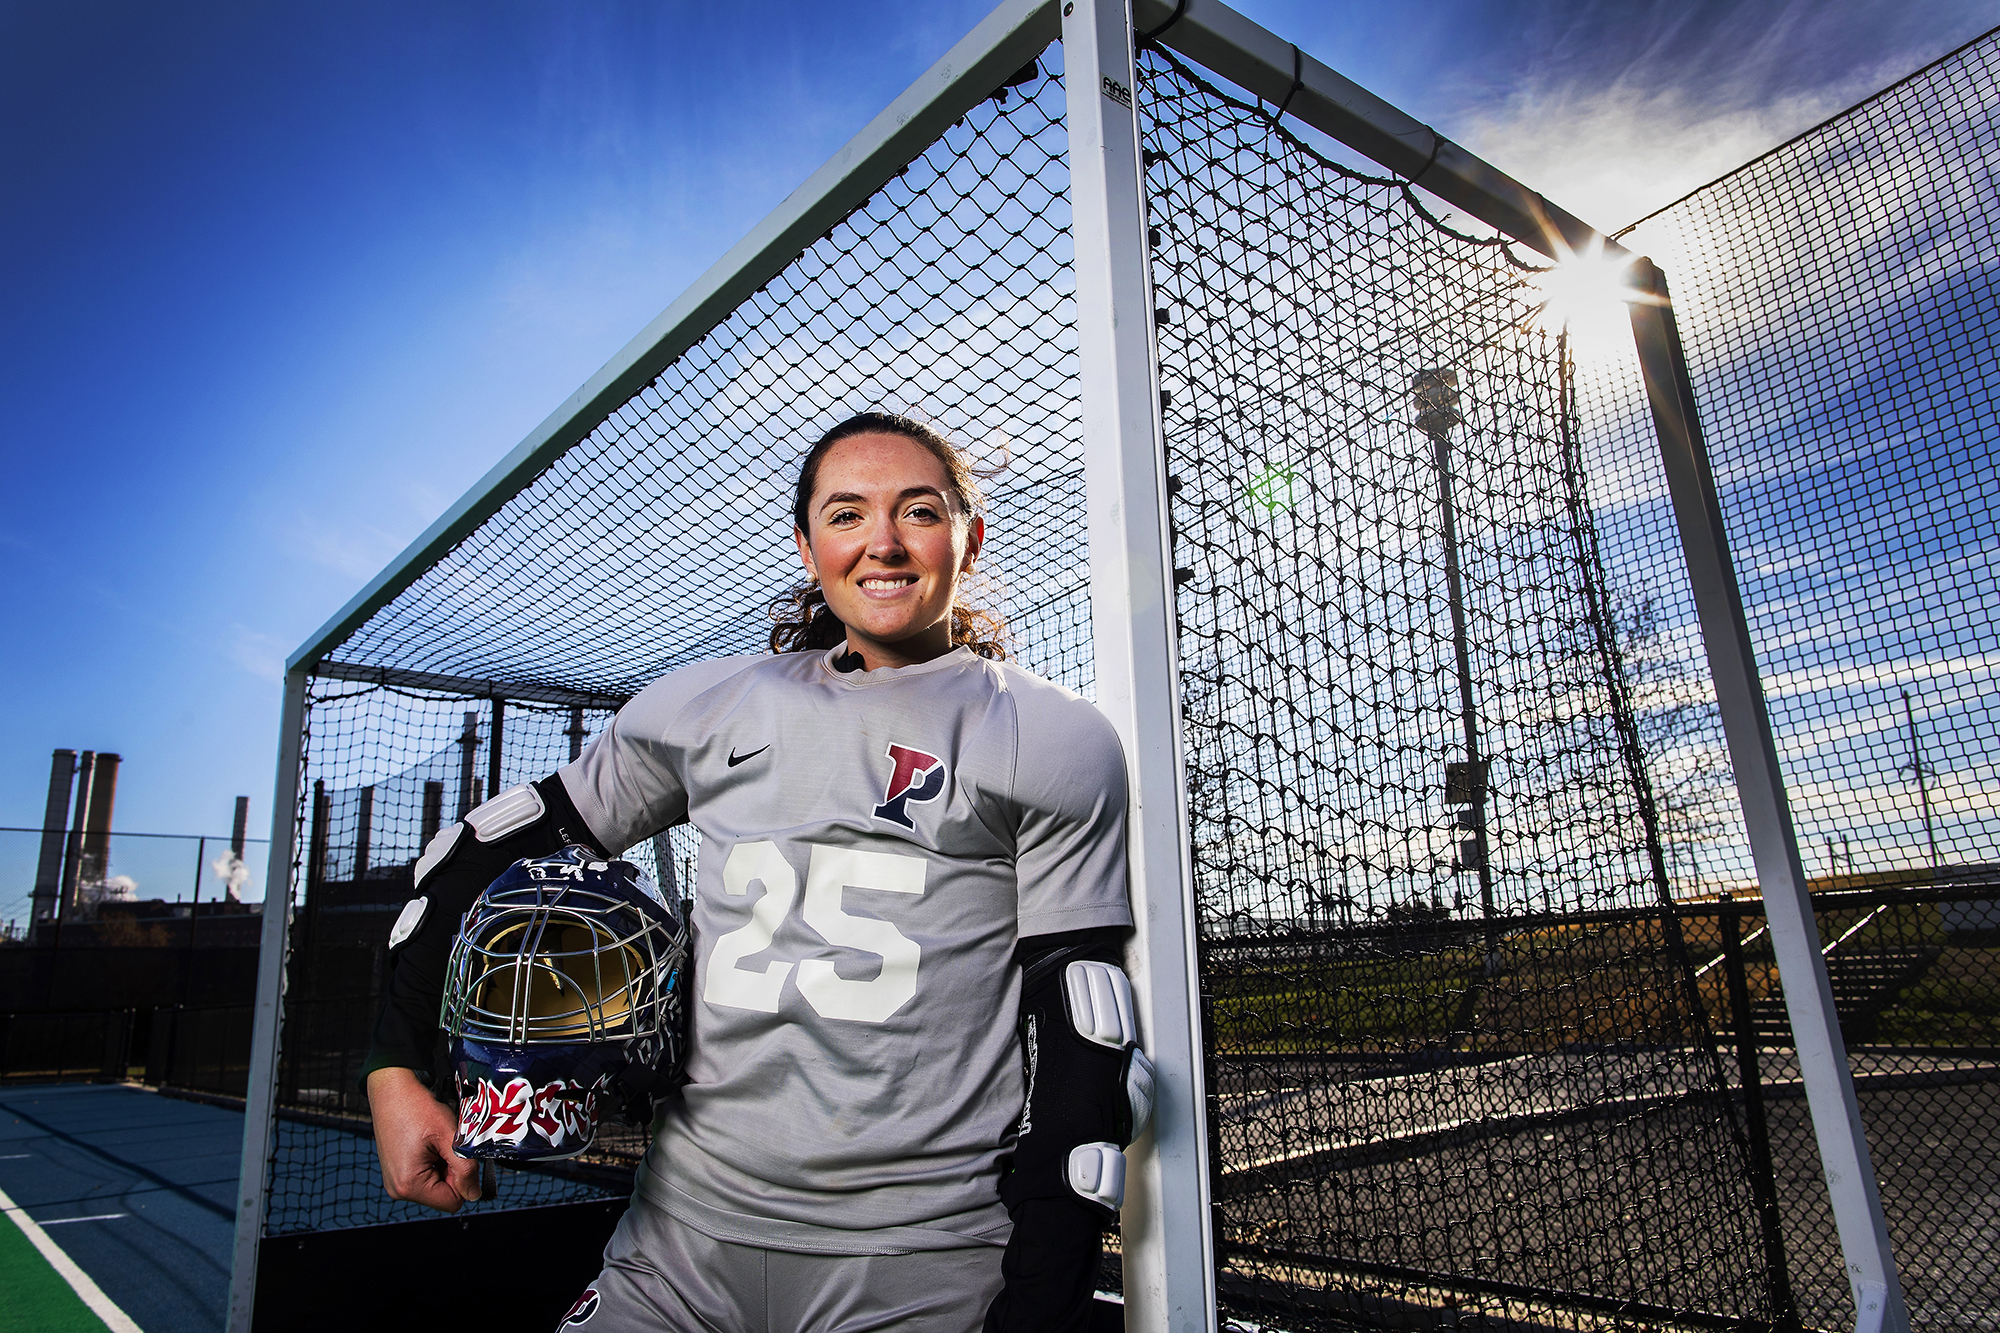 Ava Rosati of the field hockey team poses in her goalie pads in a goal at Vagelos Field.